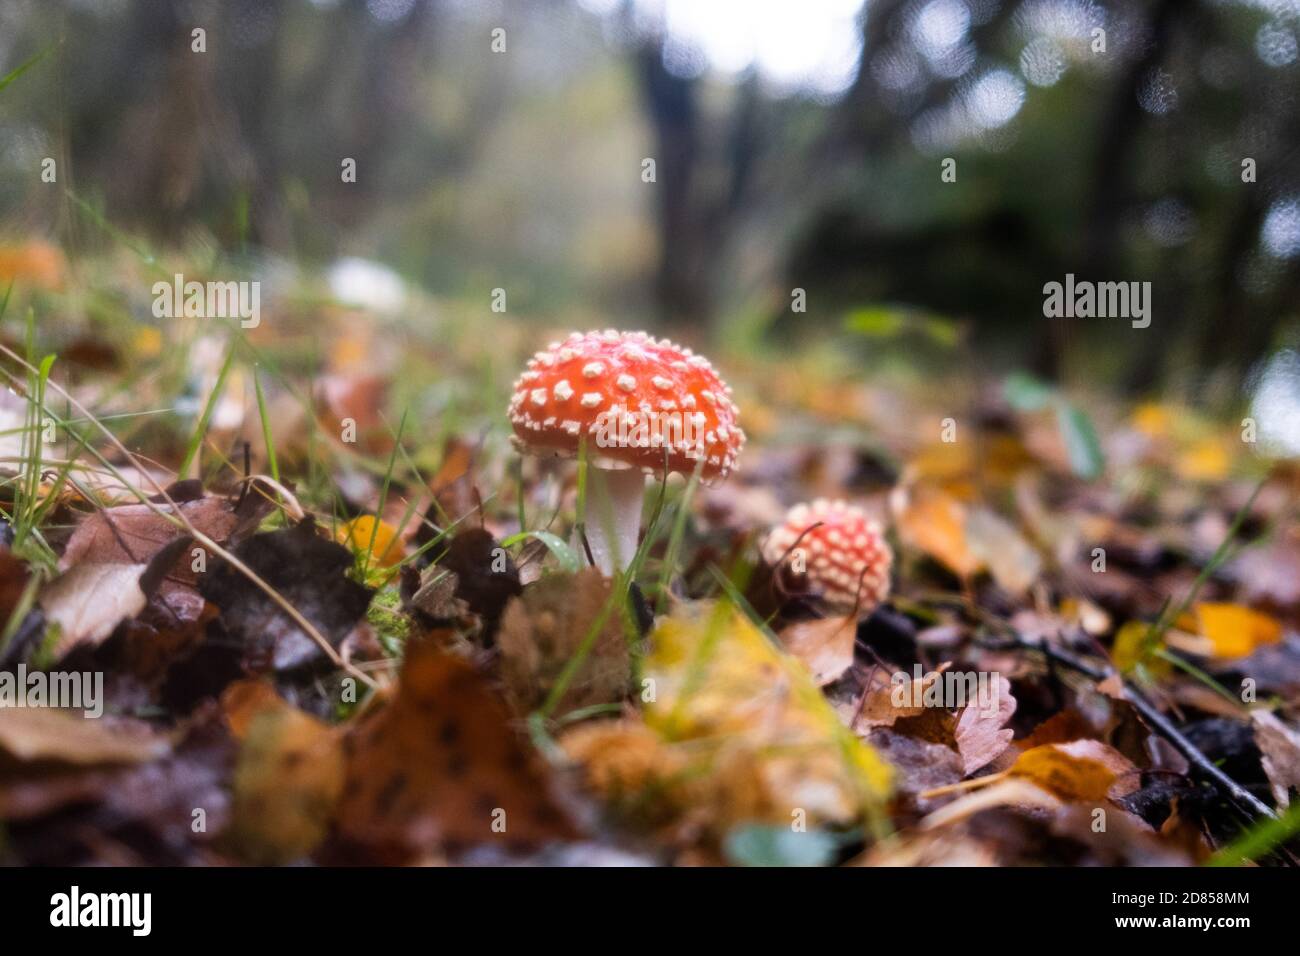 Amanita muscaria fungi, commonly known as the fly agaric or fly amanita, growing wild hiding in the leafy floor of the New Forest, Hampshire, England. Stock Photo